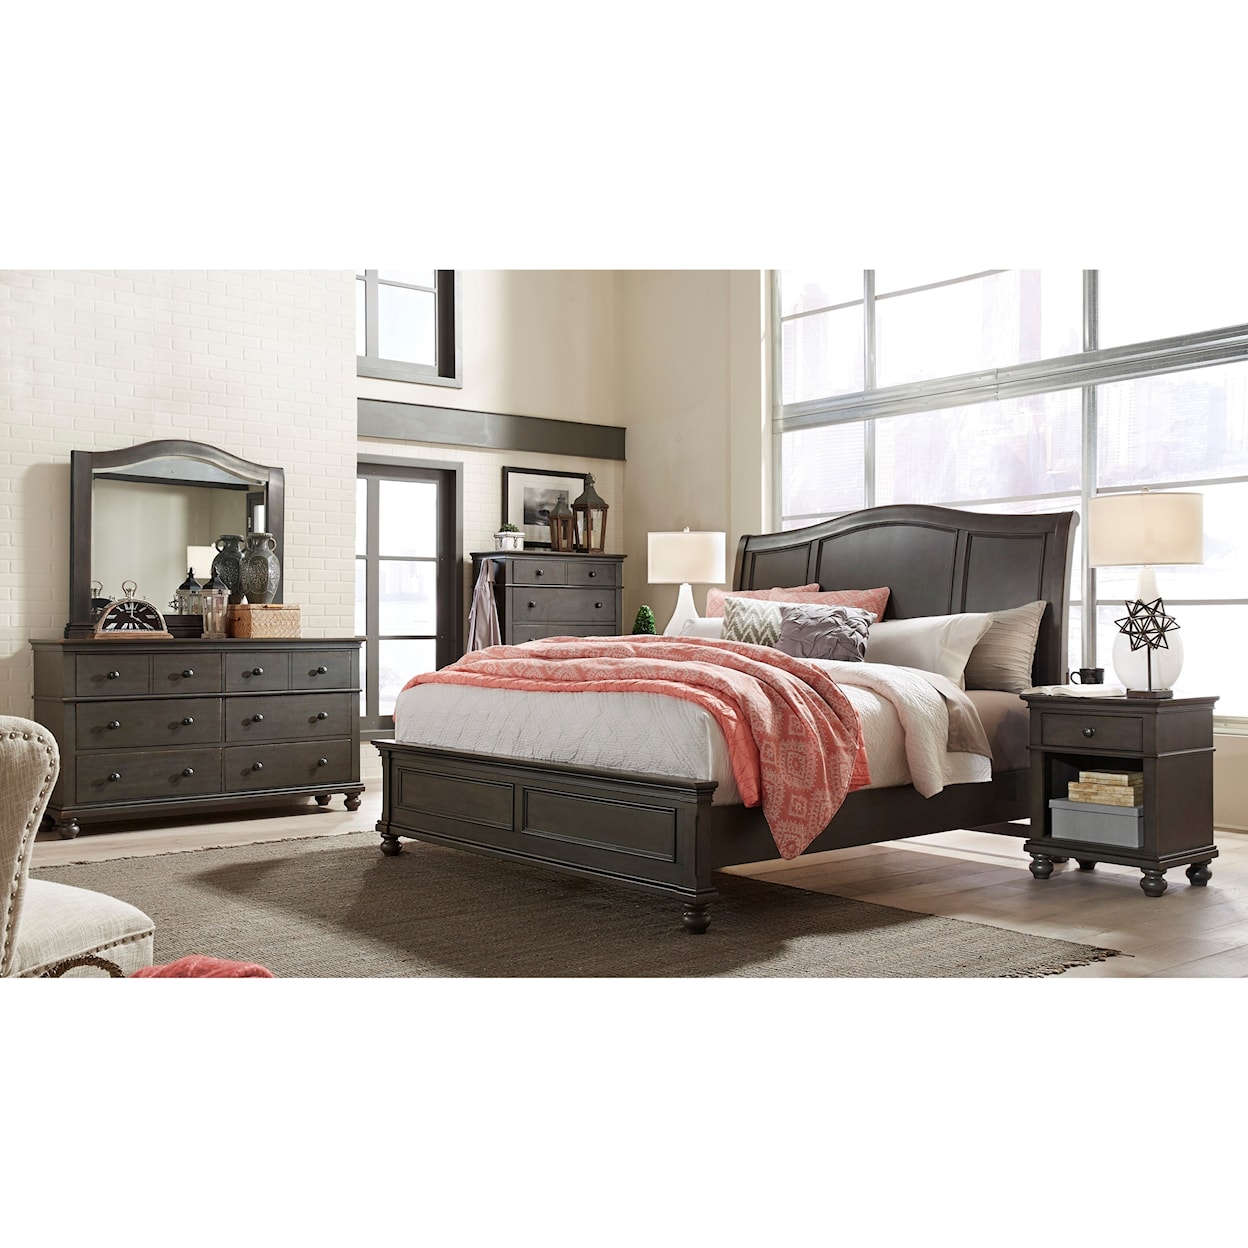 Aspenhome Oxford Cal King Sleigh Bed